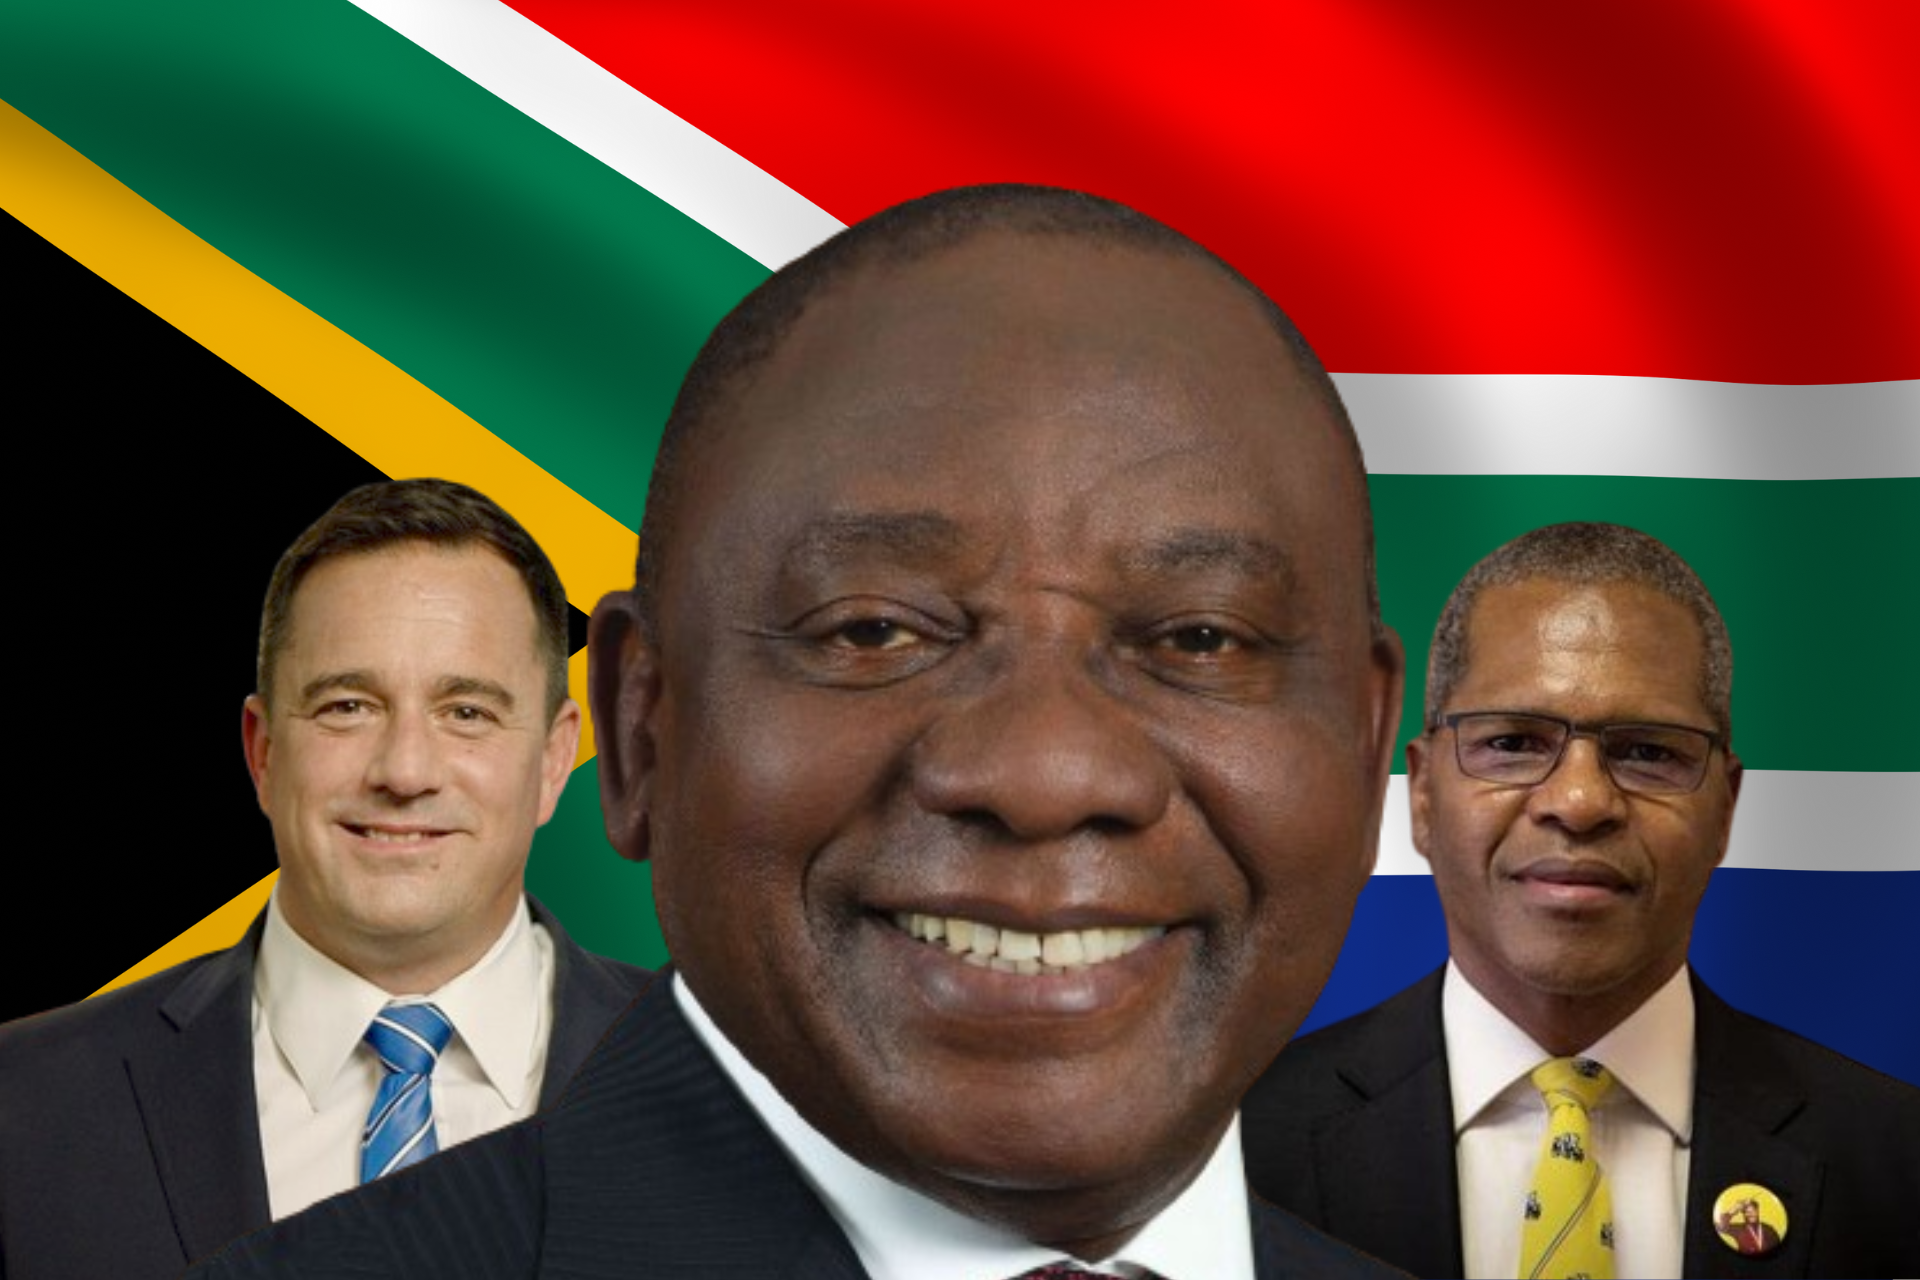 South African President Cyril Ramaphosa (center) is joined by leaders from coalition partners John Steenhuisen of the Democratic Alliance (left) and Velenkosini Hlabisa of the Inkatha Freedom Party (right) as the ANC navigates its first coalition government following a historic parliamentary session.